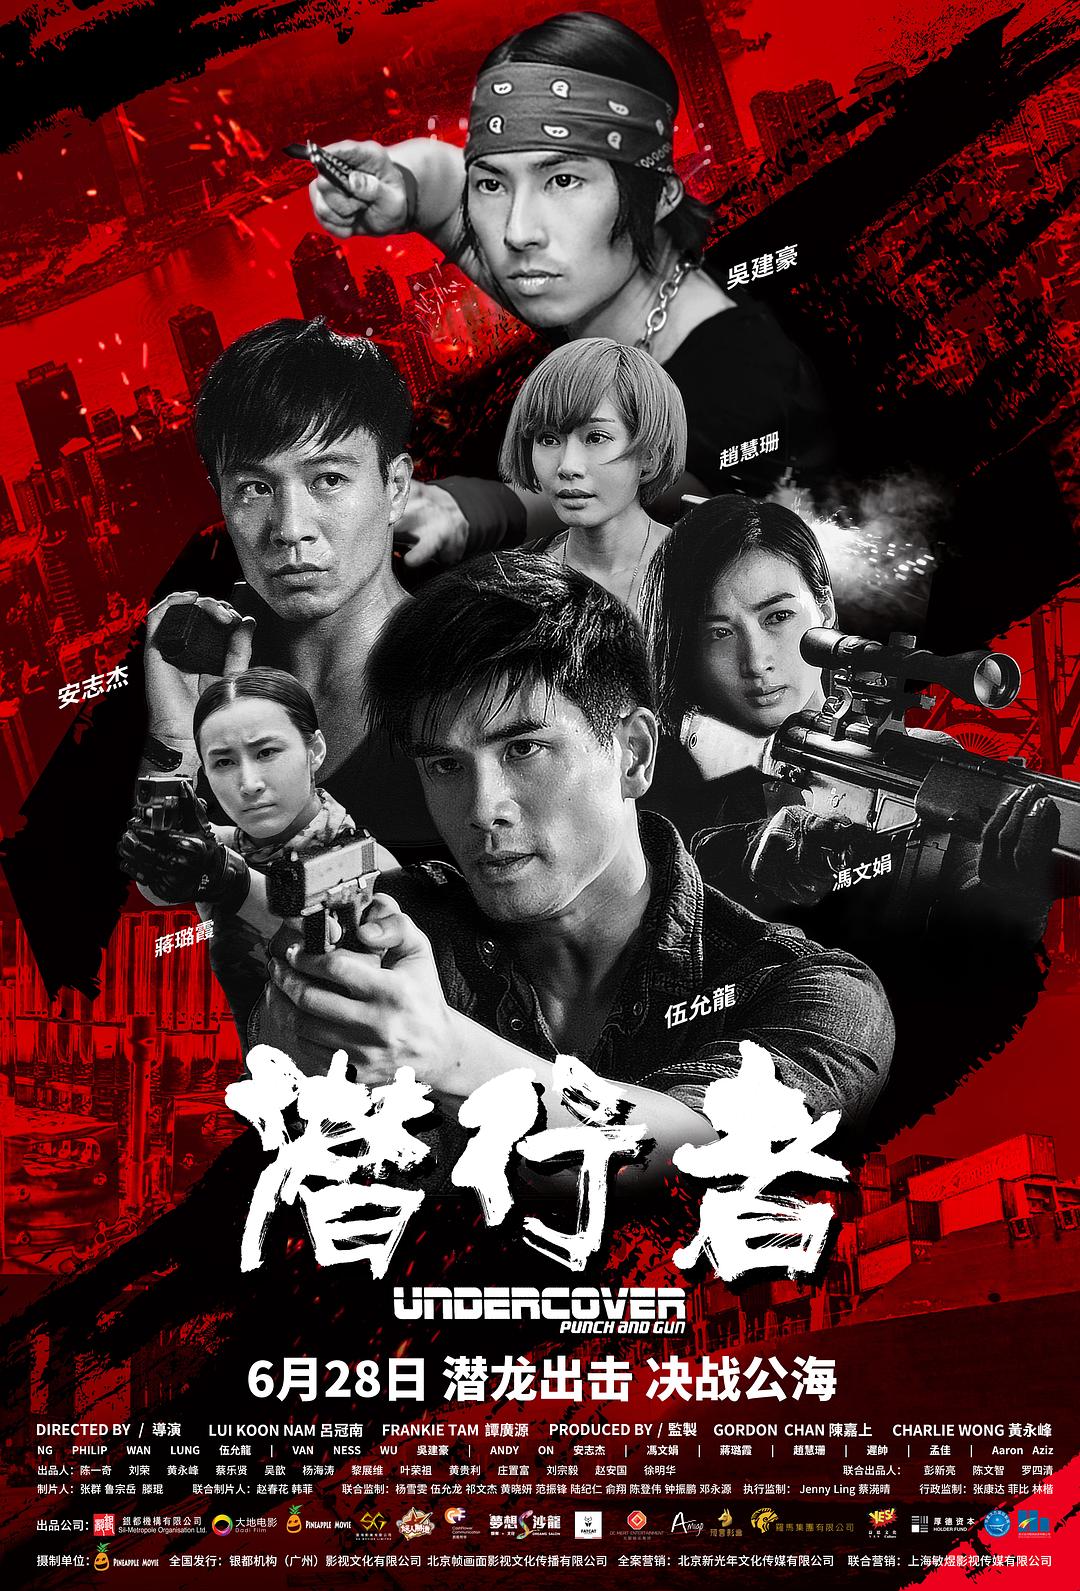 Ǳ Undercover.Punch.and.Gun.2019.CHINESE.1080p.BluRay.AVC.TrueHD.5.1-FGT 23.24G-1.png